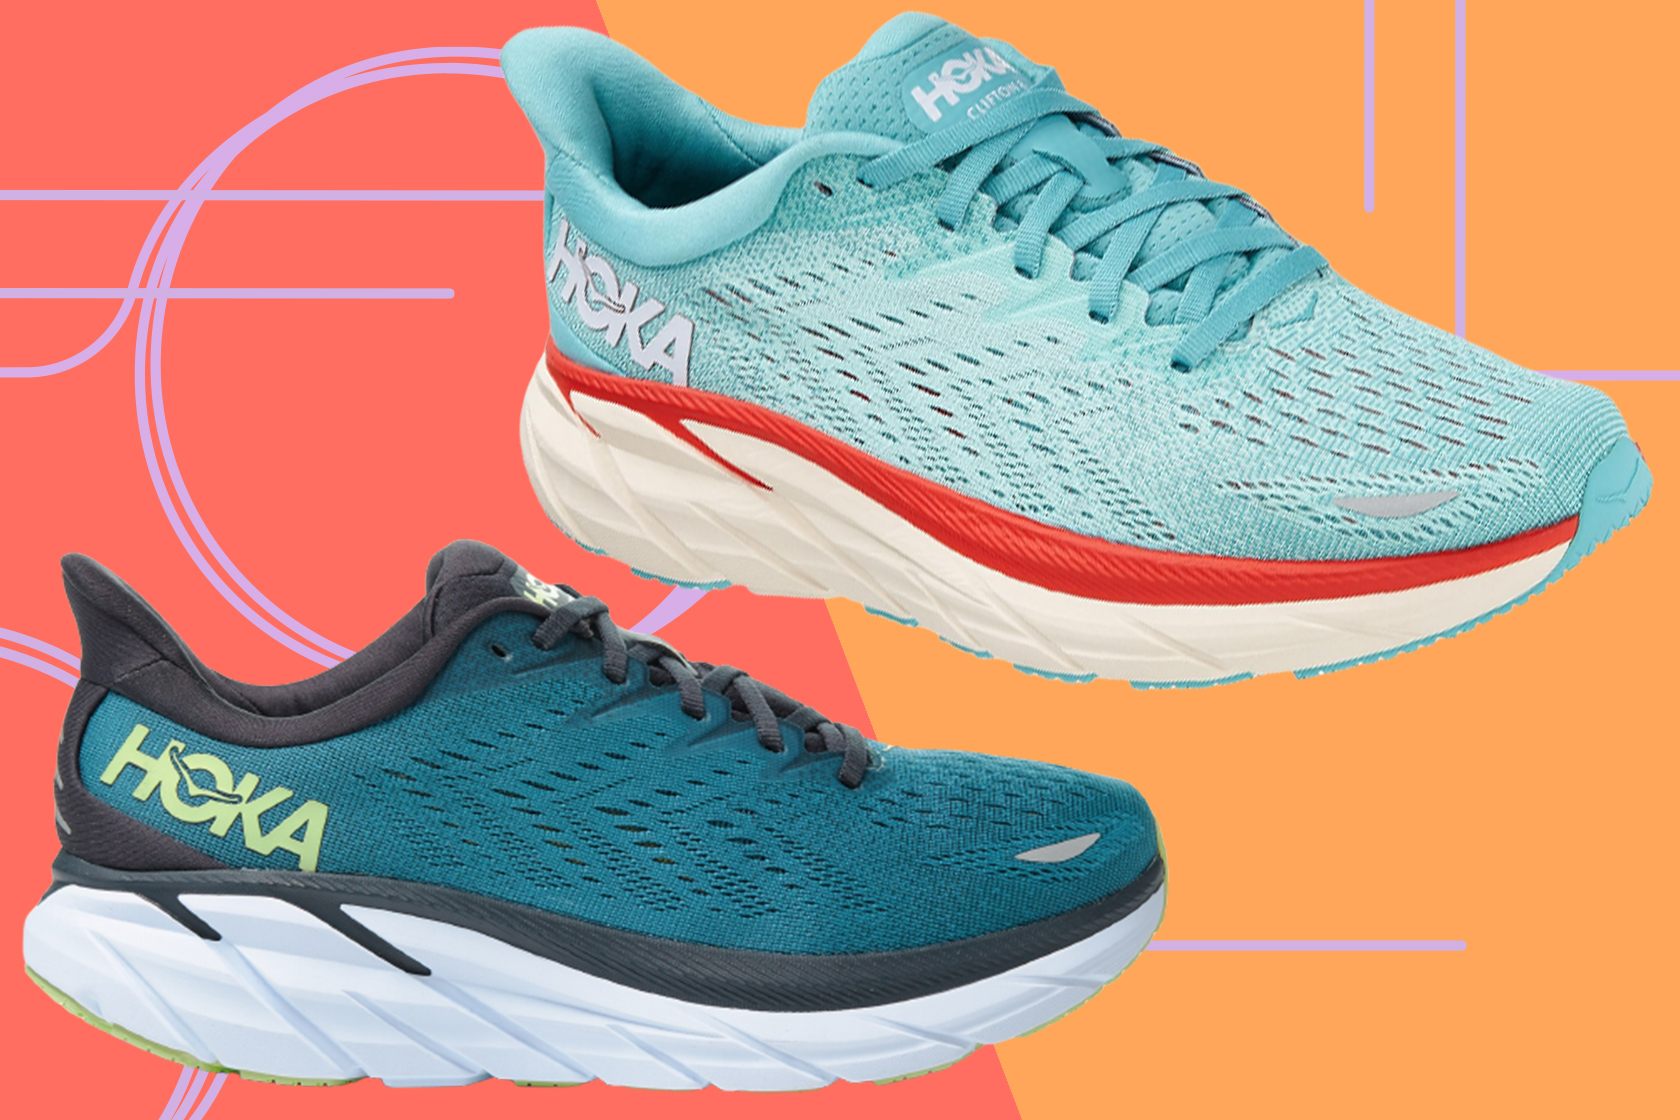 Get HOKA Clifton 8 running shoes for 19% off at REI today